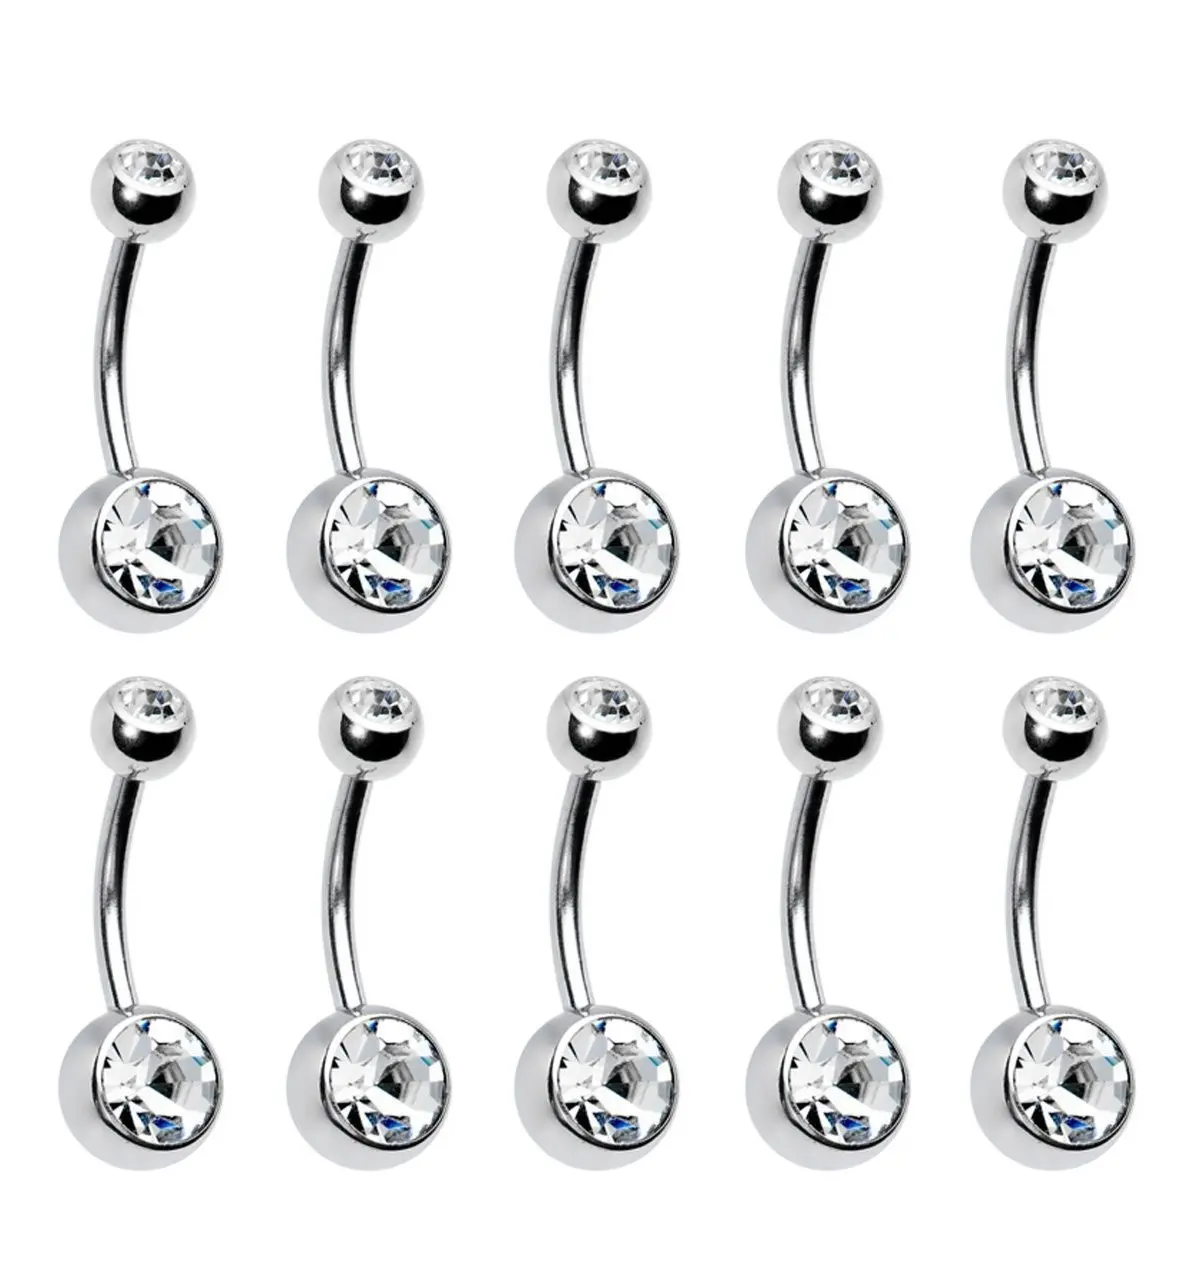 

10pcs Set Sexy Women Piercing Ombligo Piercings Navel Ring Colorful Body Jewelry Pircings Surgical Steel Belly Button Ring